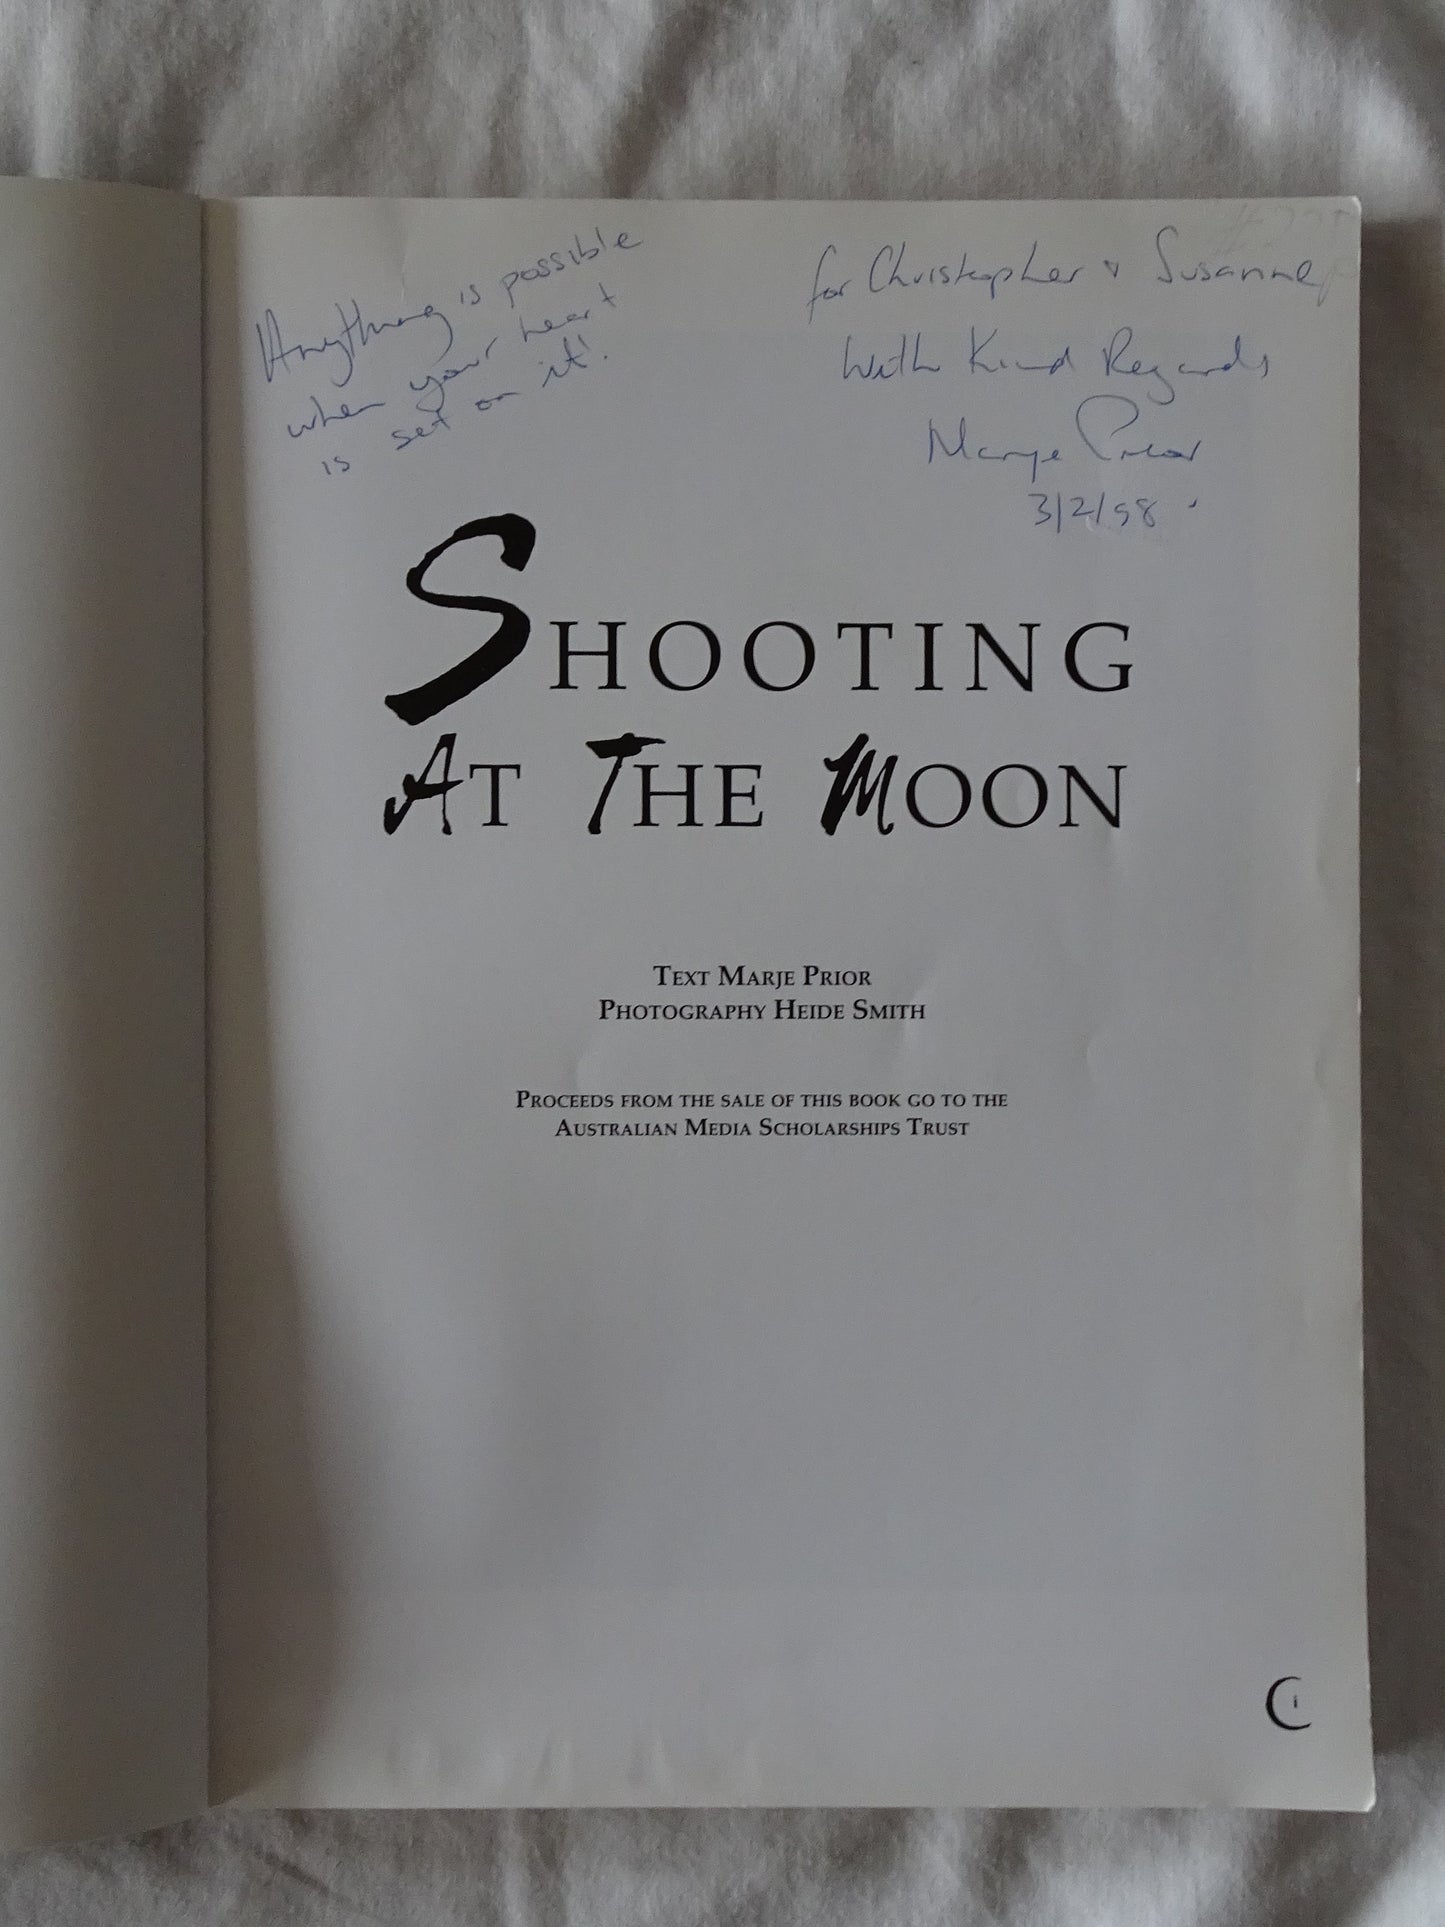 Shooting At The Moon by Marje Prior and Heide Smith